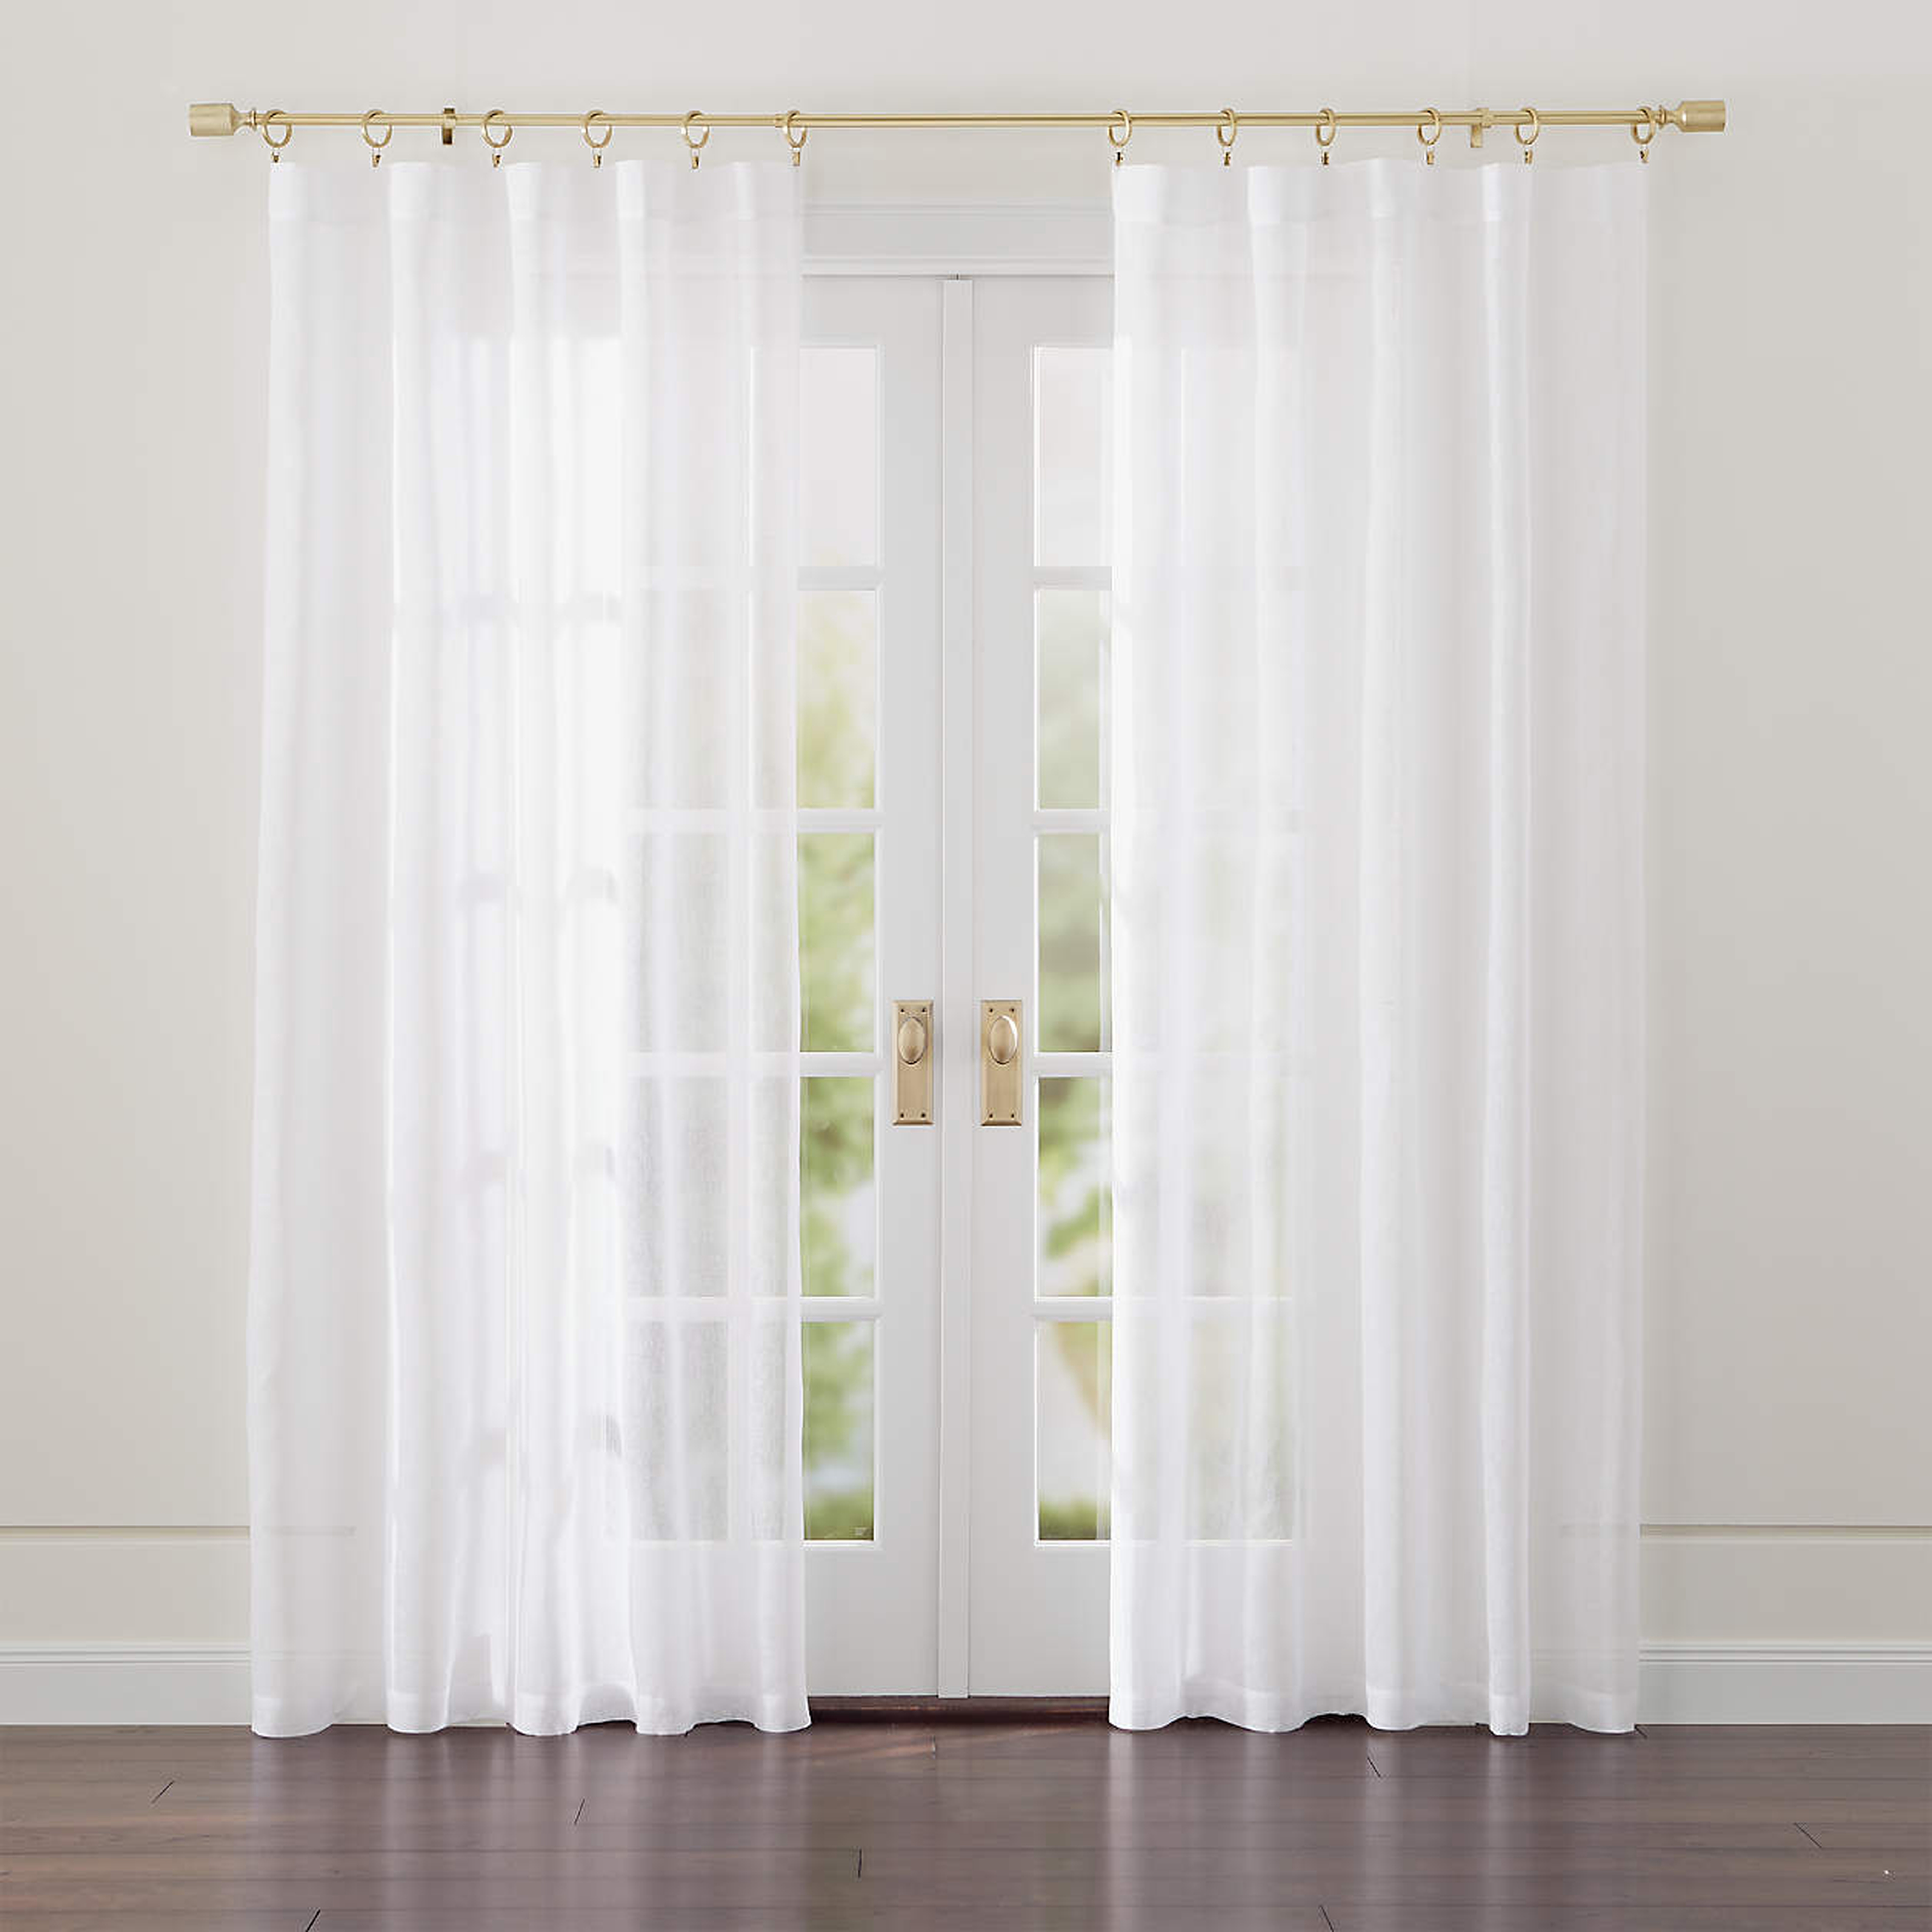 Linen Sheer Curtains, White, 52" x 96" - Crate and Barrel